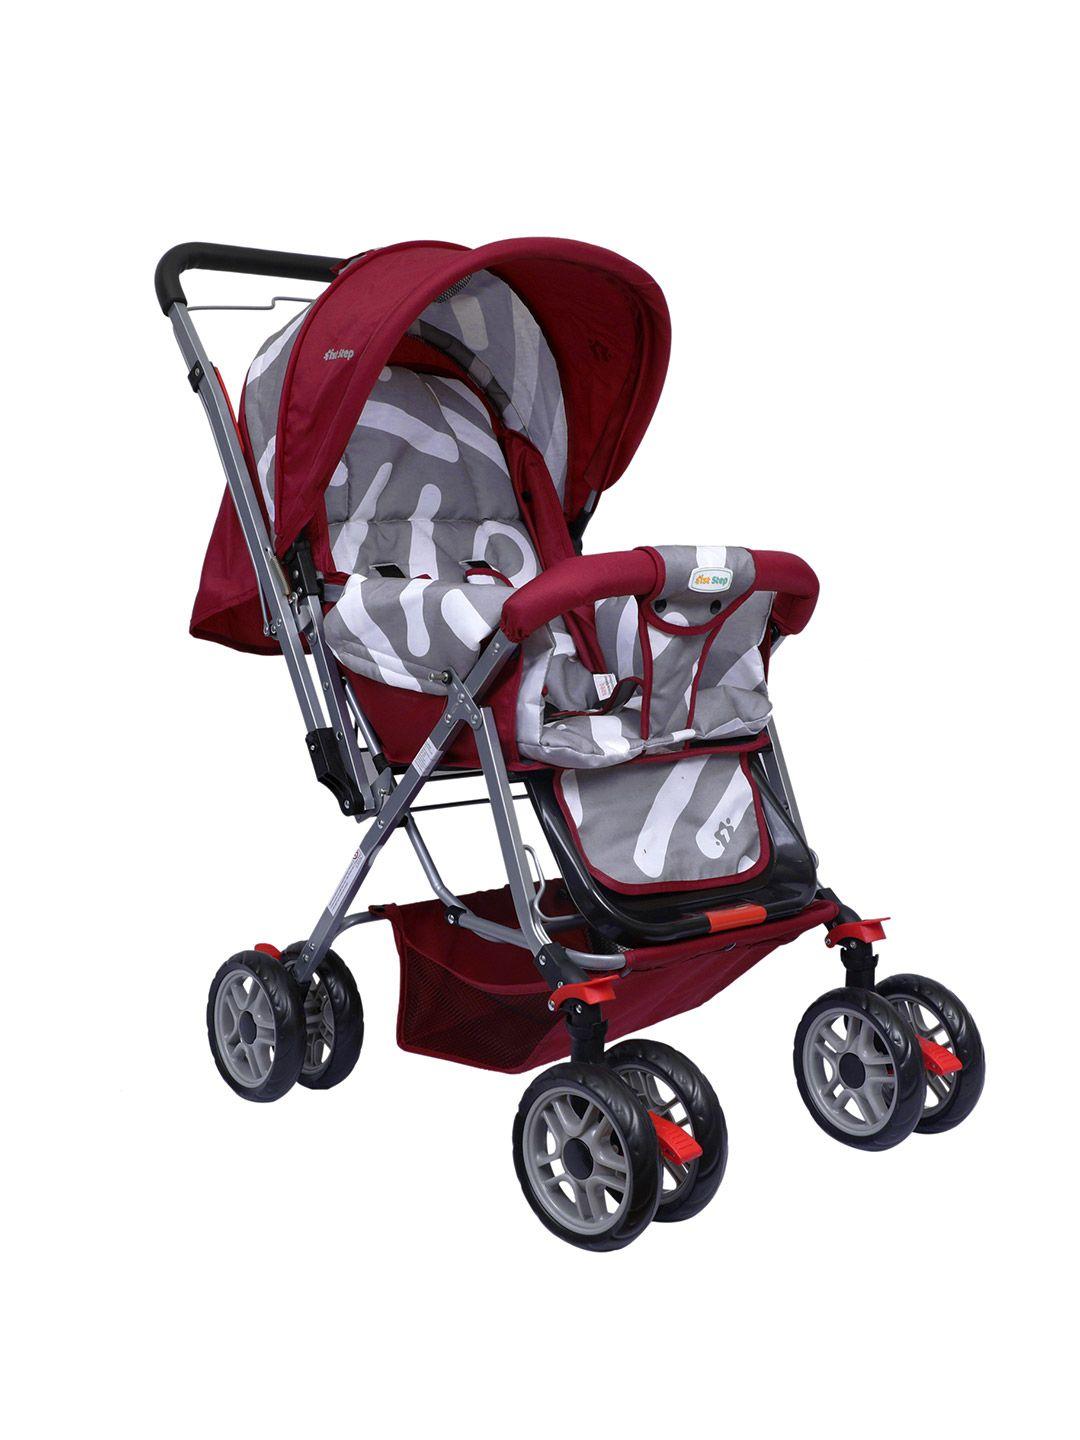 1st step kids red & grey baby stroller with 5 point safety harness & reversible handlebar